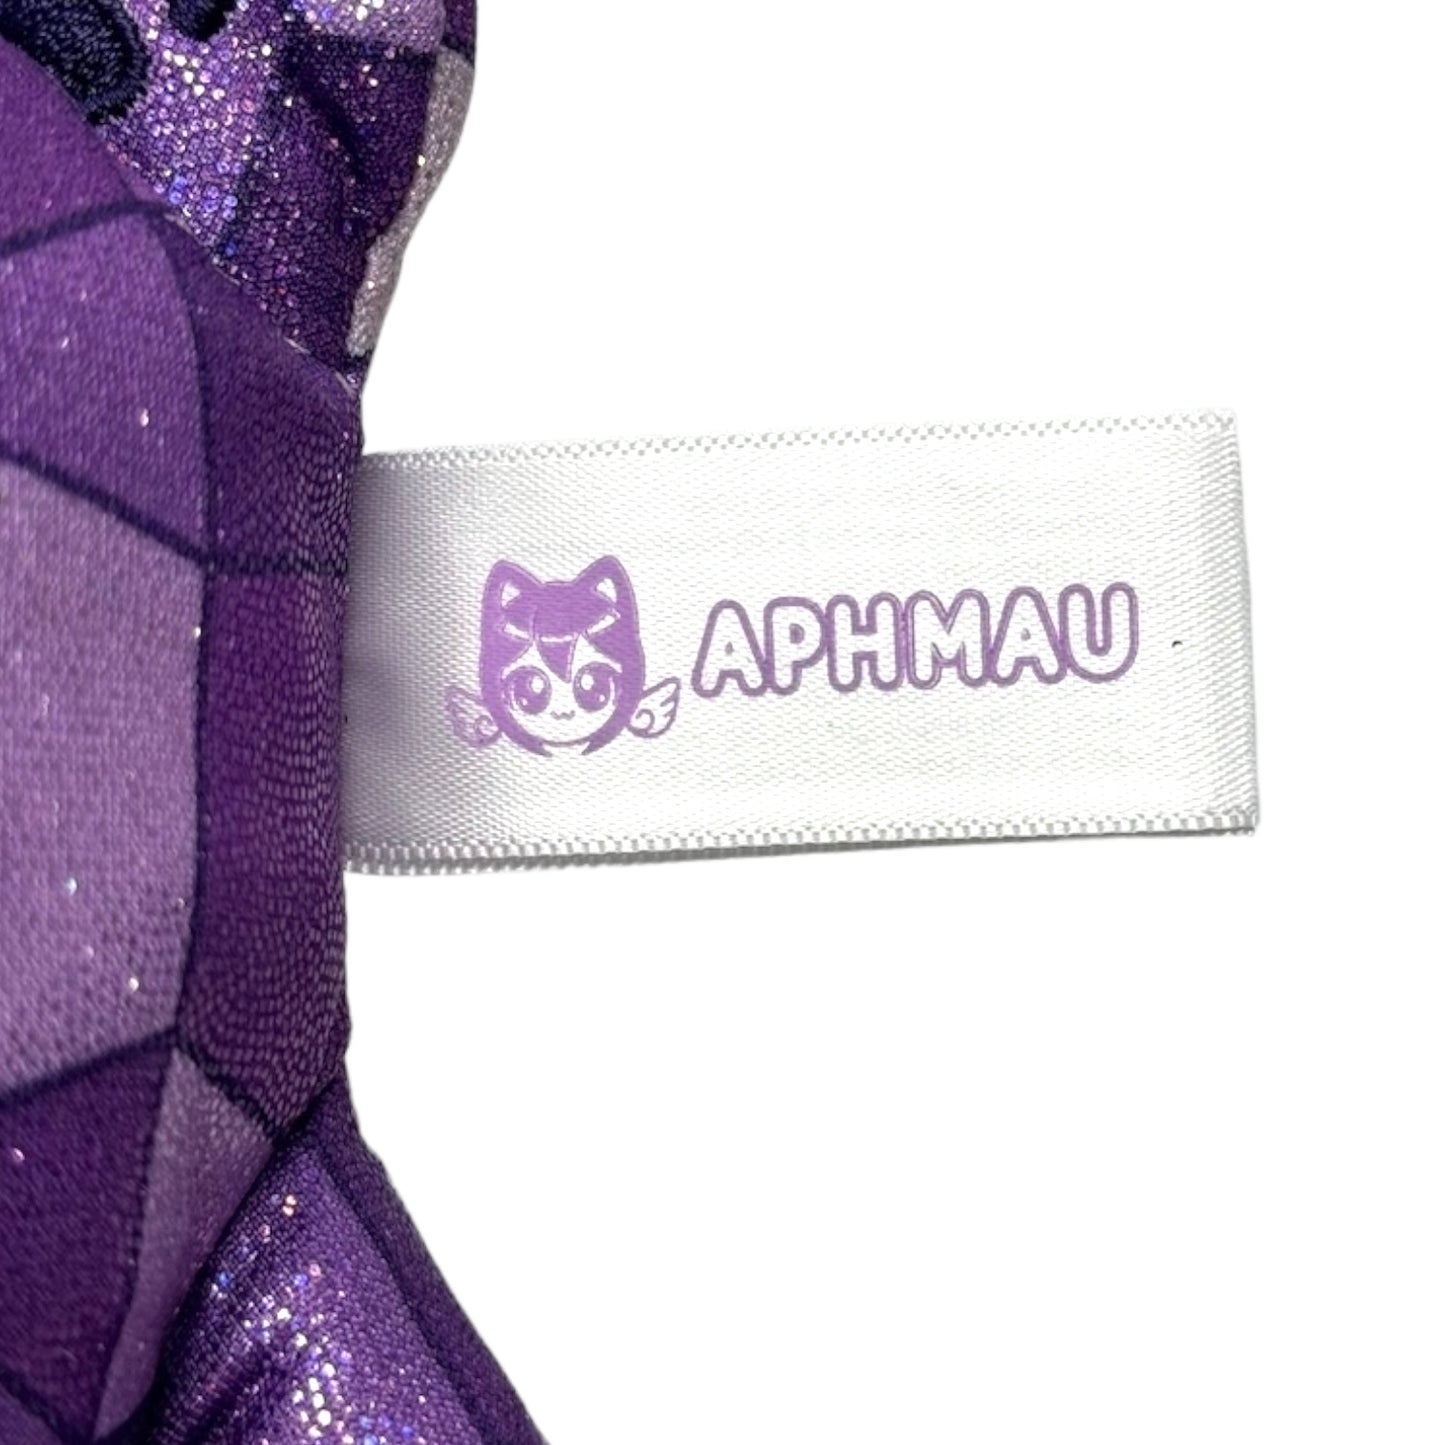 AMETHYST CAT - MeeMeows Litter 4 from Aphmau (BRAND NEW) HTF Claire's Exclusive!